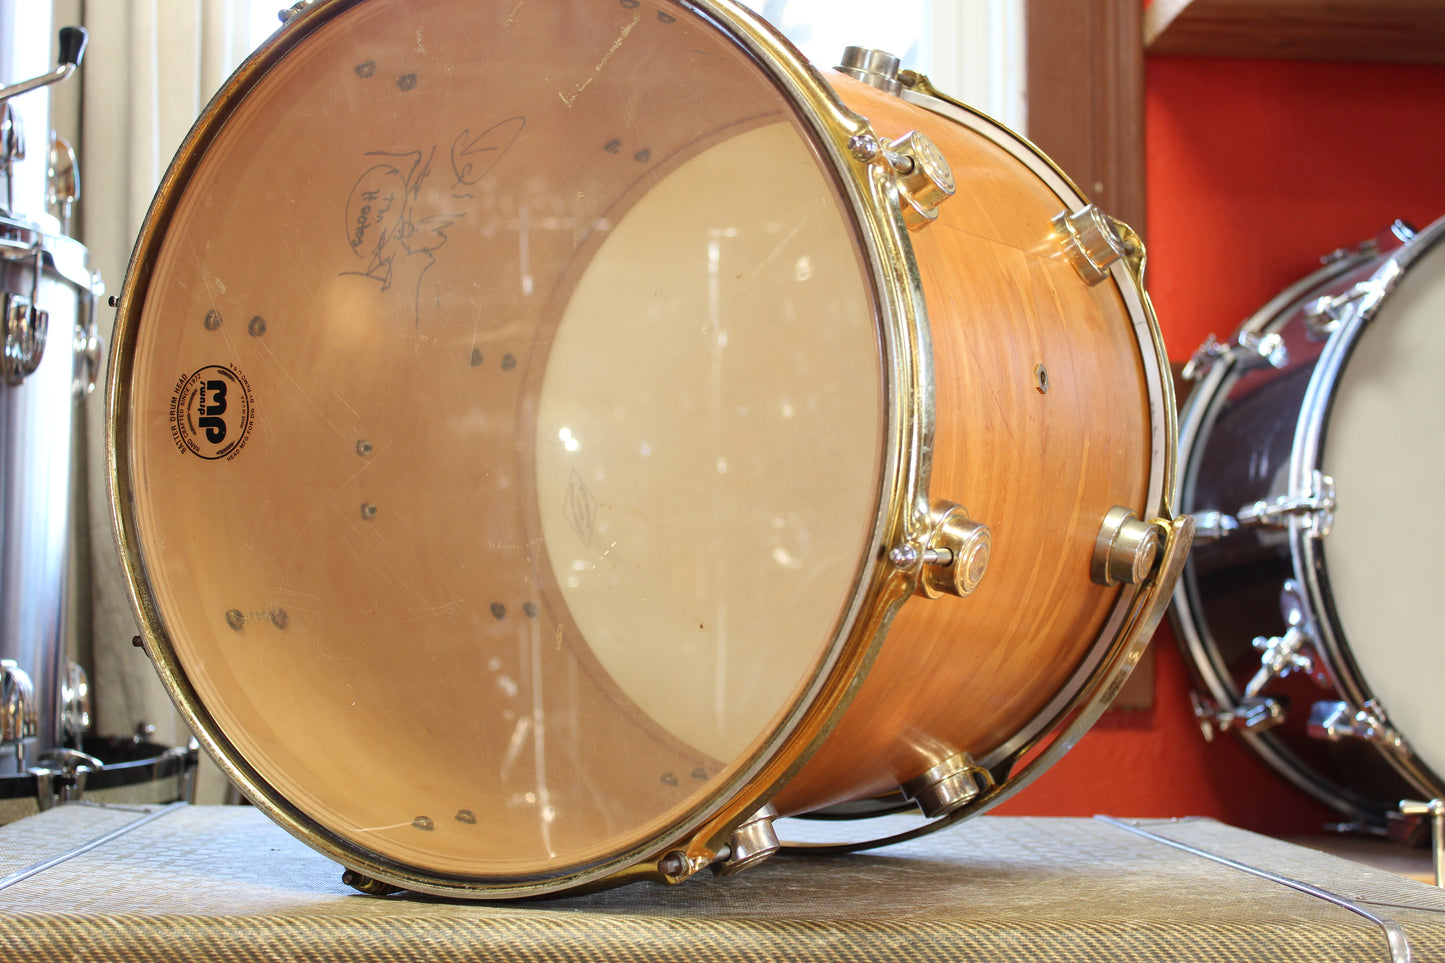 1990s DW Pre Collectors Series in Natural Maple 14x22 14x16 8x12